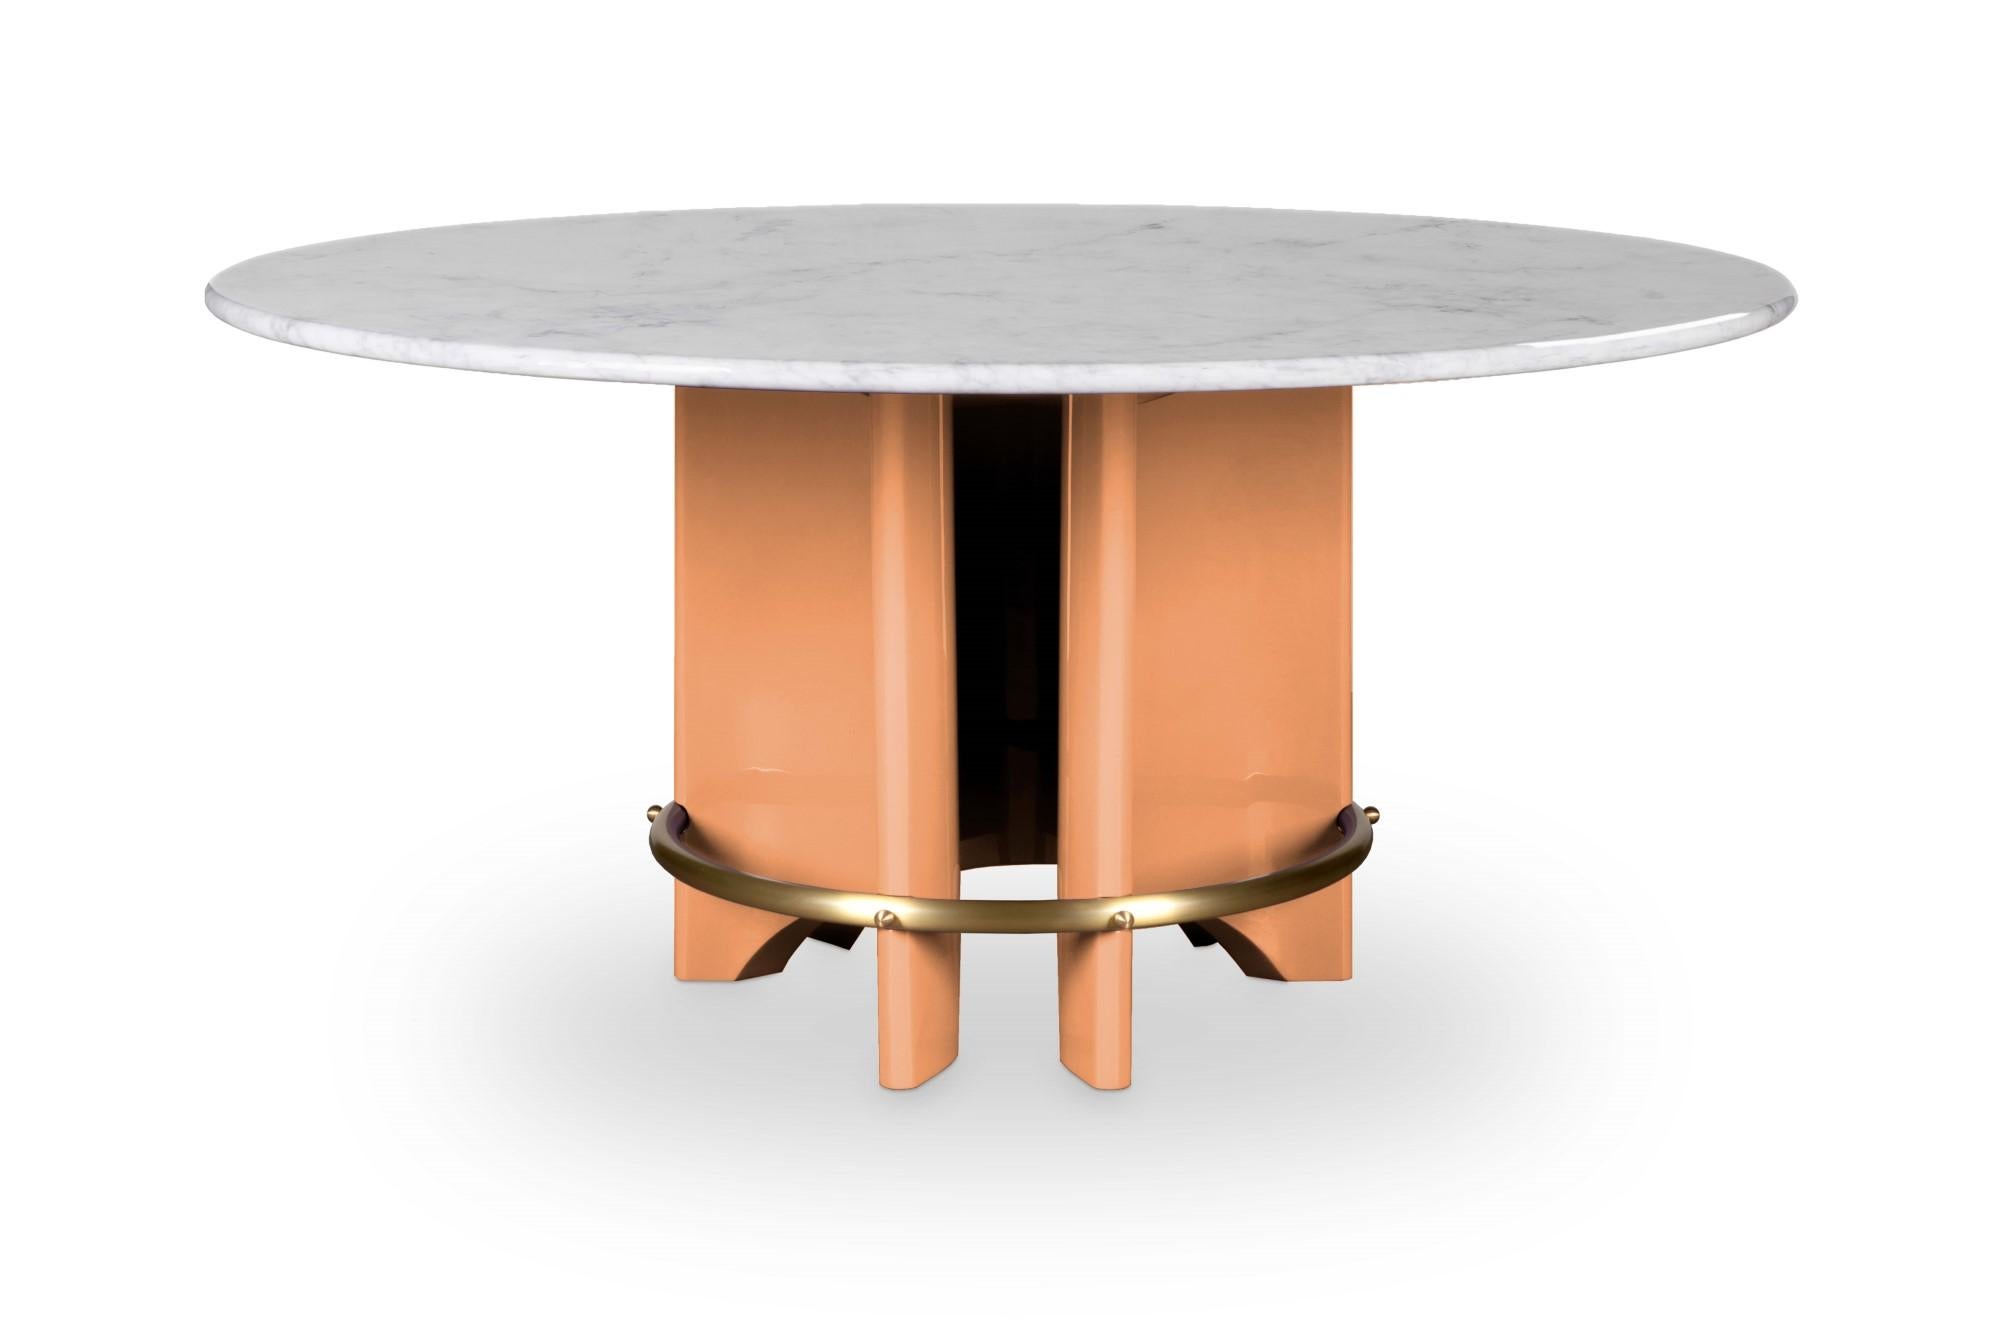 Meyer table by Royal Stranger
Dimensions: D 160 x W 160 x H 75 cm.
Materials: Carrara marble with polished finish, lacquered with glossy finish base, polished brass ring.

Available in:
Table Top: Carrara Marble, Nero Marquina, Estremoz, Rose